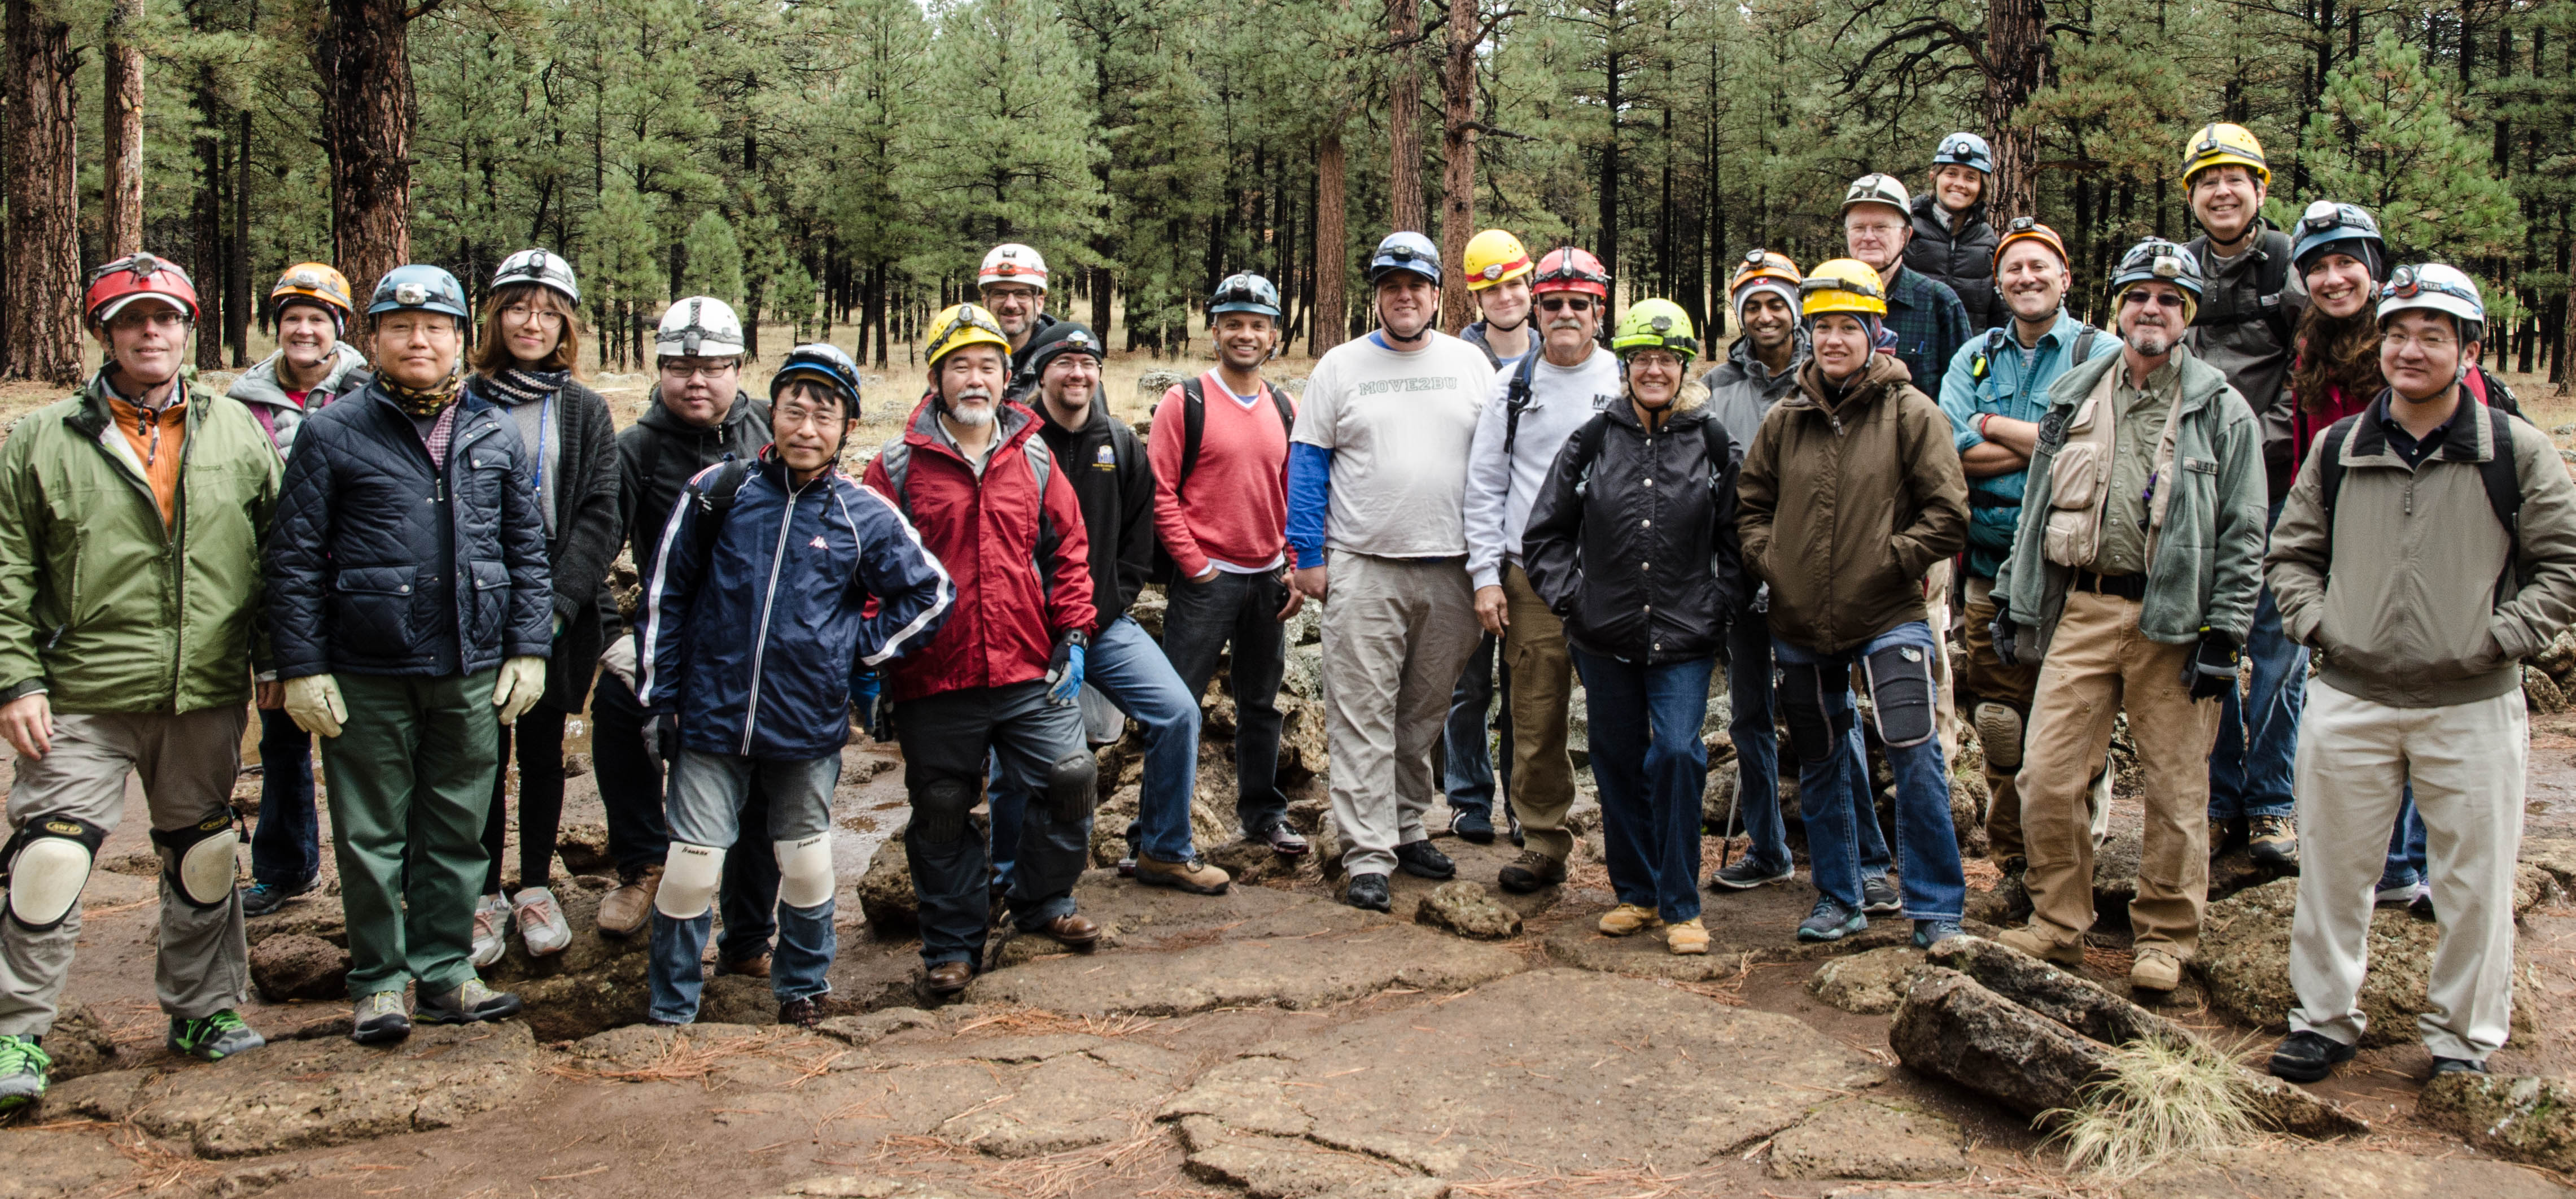 Field trip photo from the 2nd International Planetary Caves Conference at the lava tubes in Flagstaff, AZ